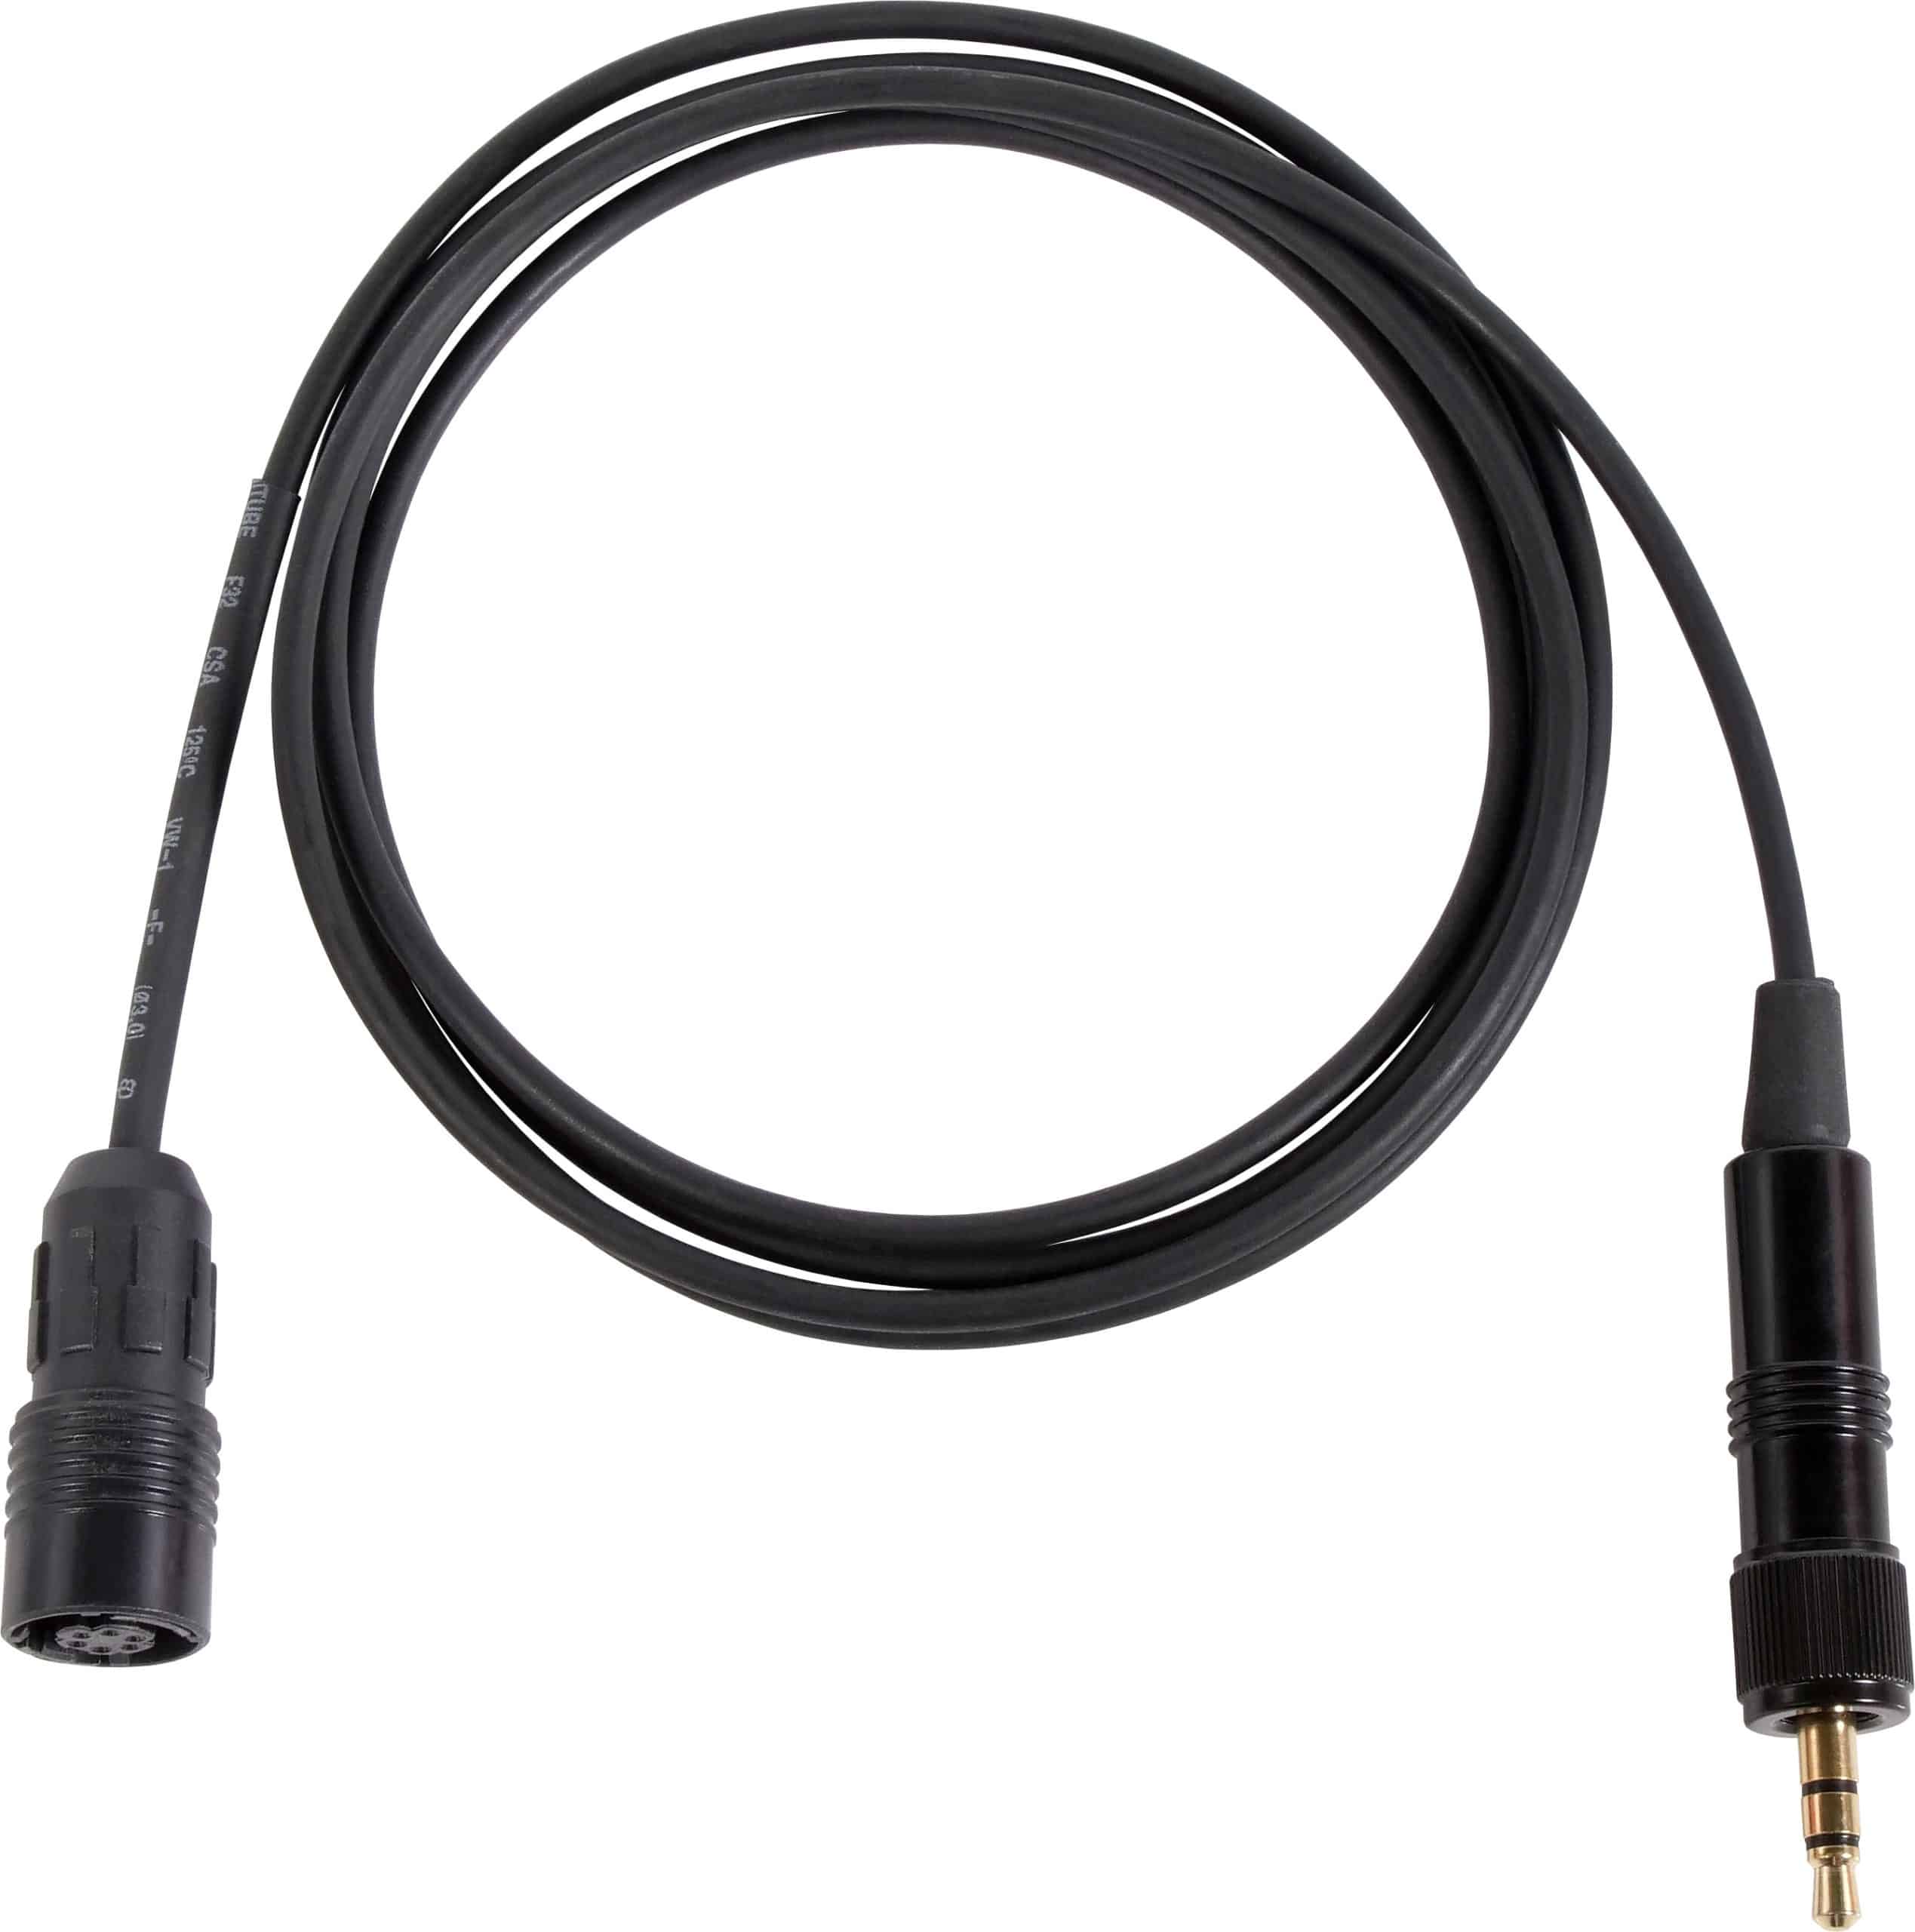 Replacement cable for H2O7 Wireless Headset Mic. The cable is wired to work with Sennheiser® systems.